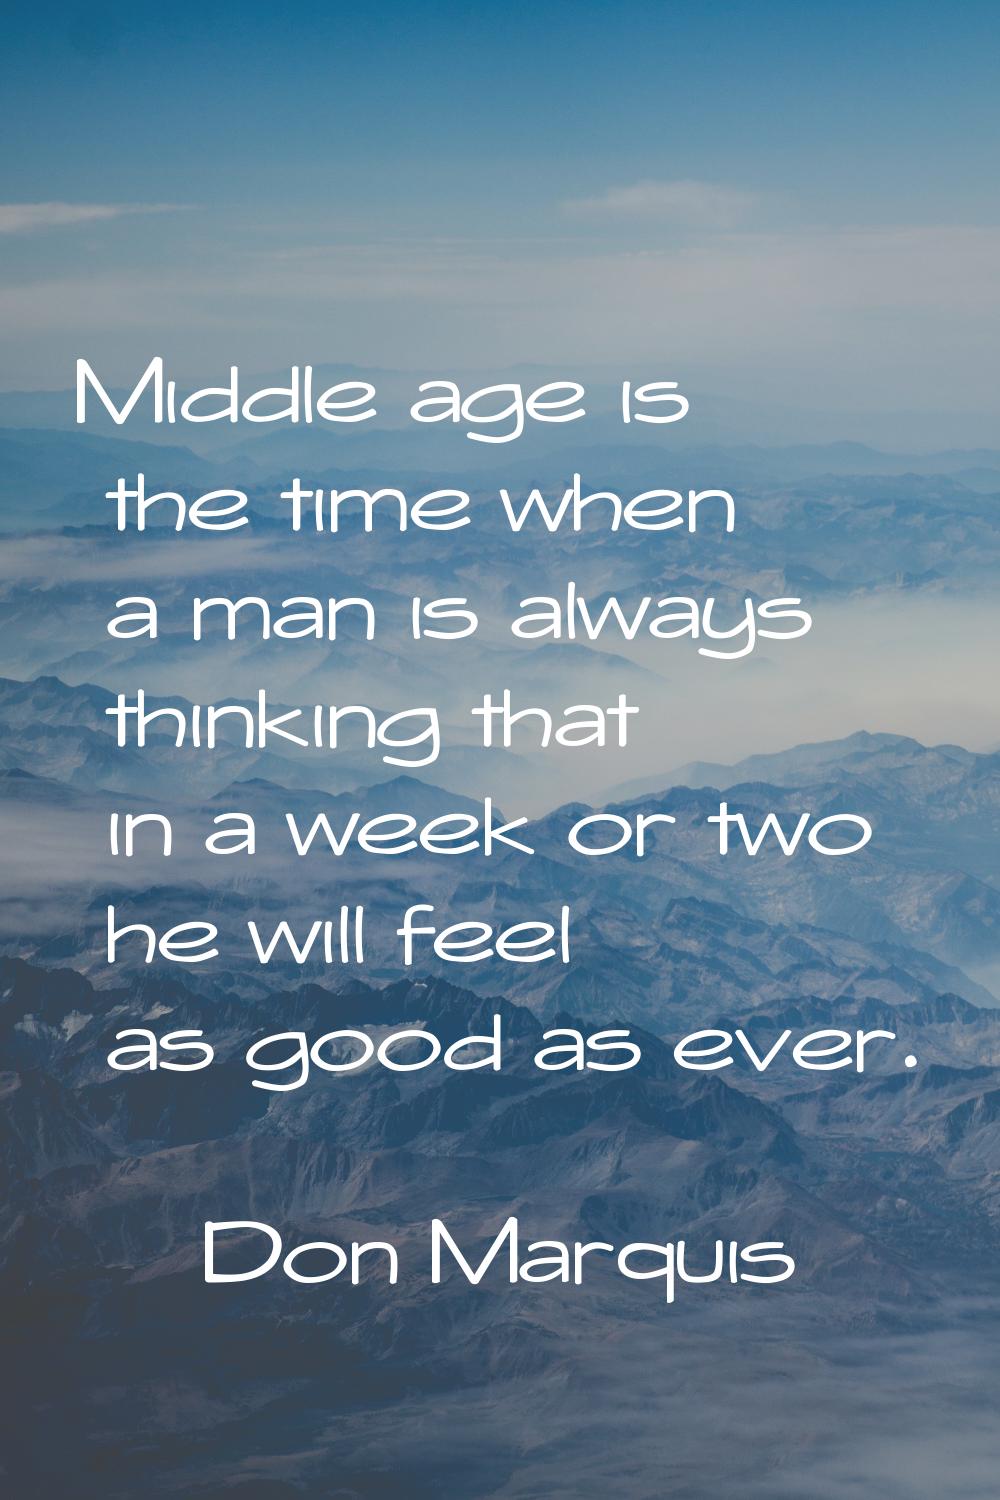 Middle age is the time when a man is always thinking that in a week or two he will feel as good as 